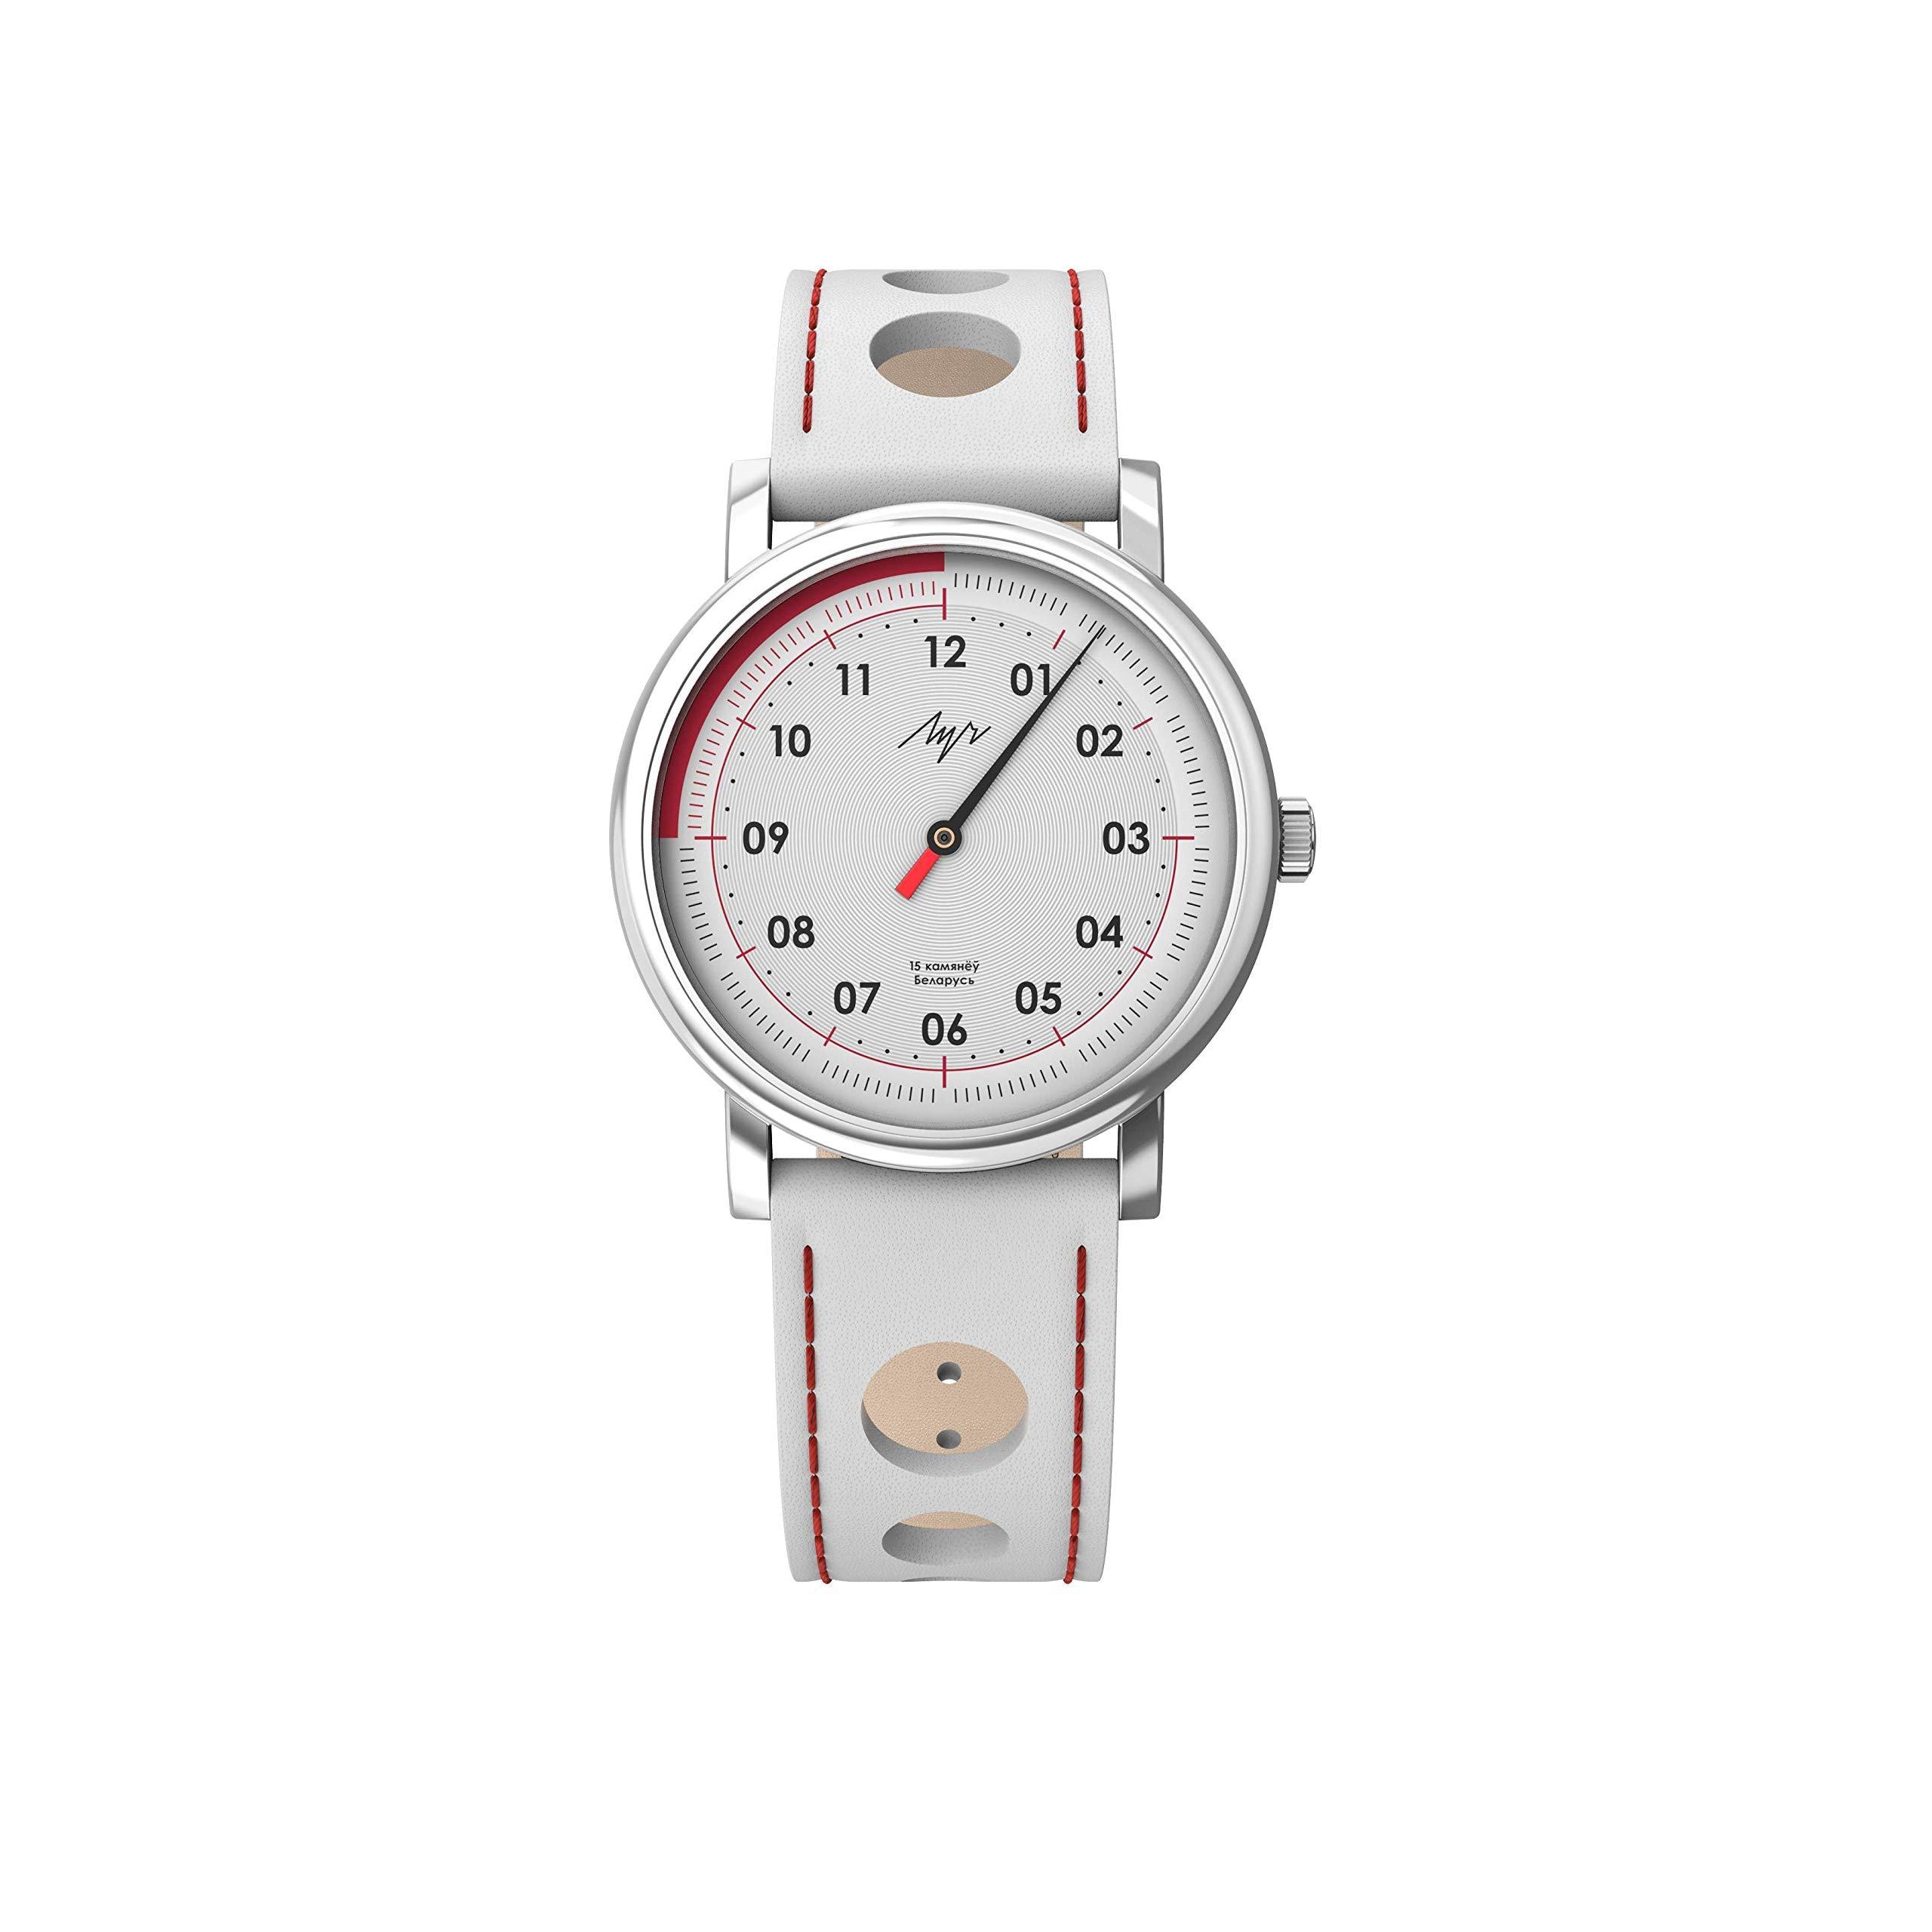 Luch Handwinding One-Handed Speed Watch White - 71951778